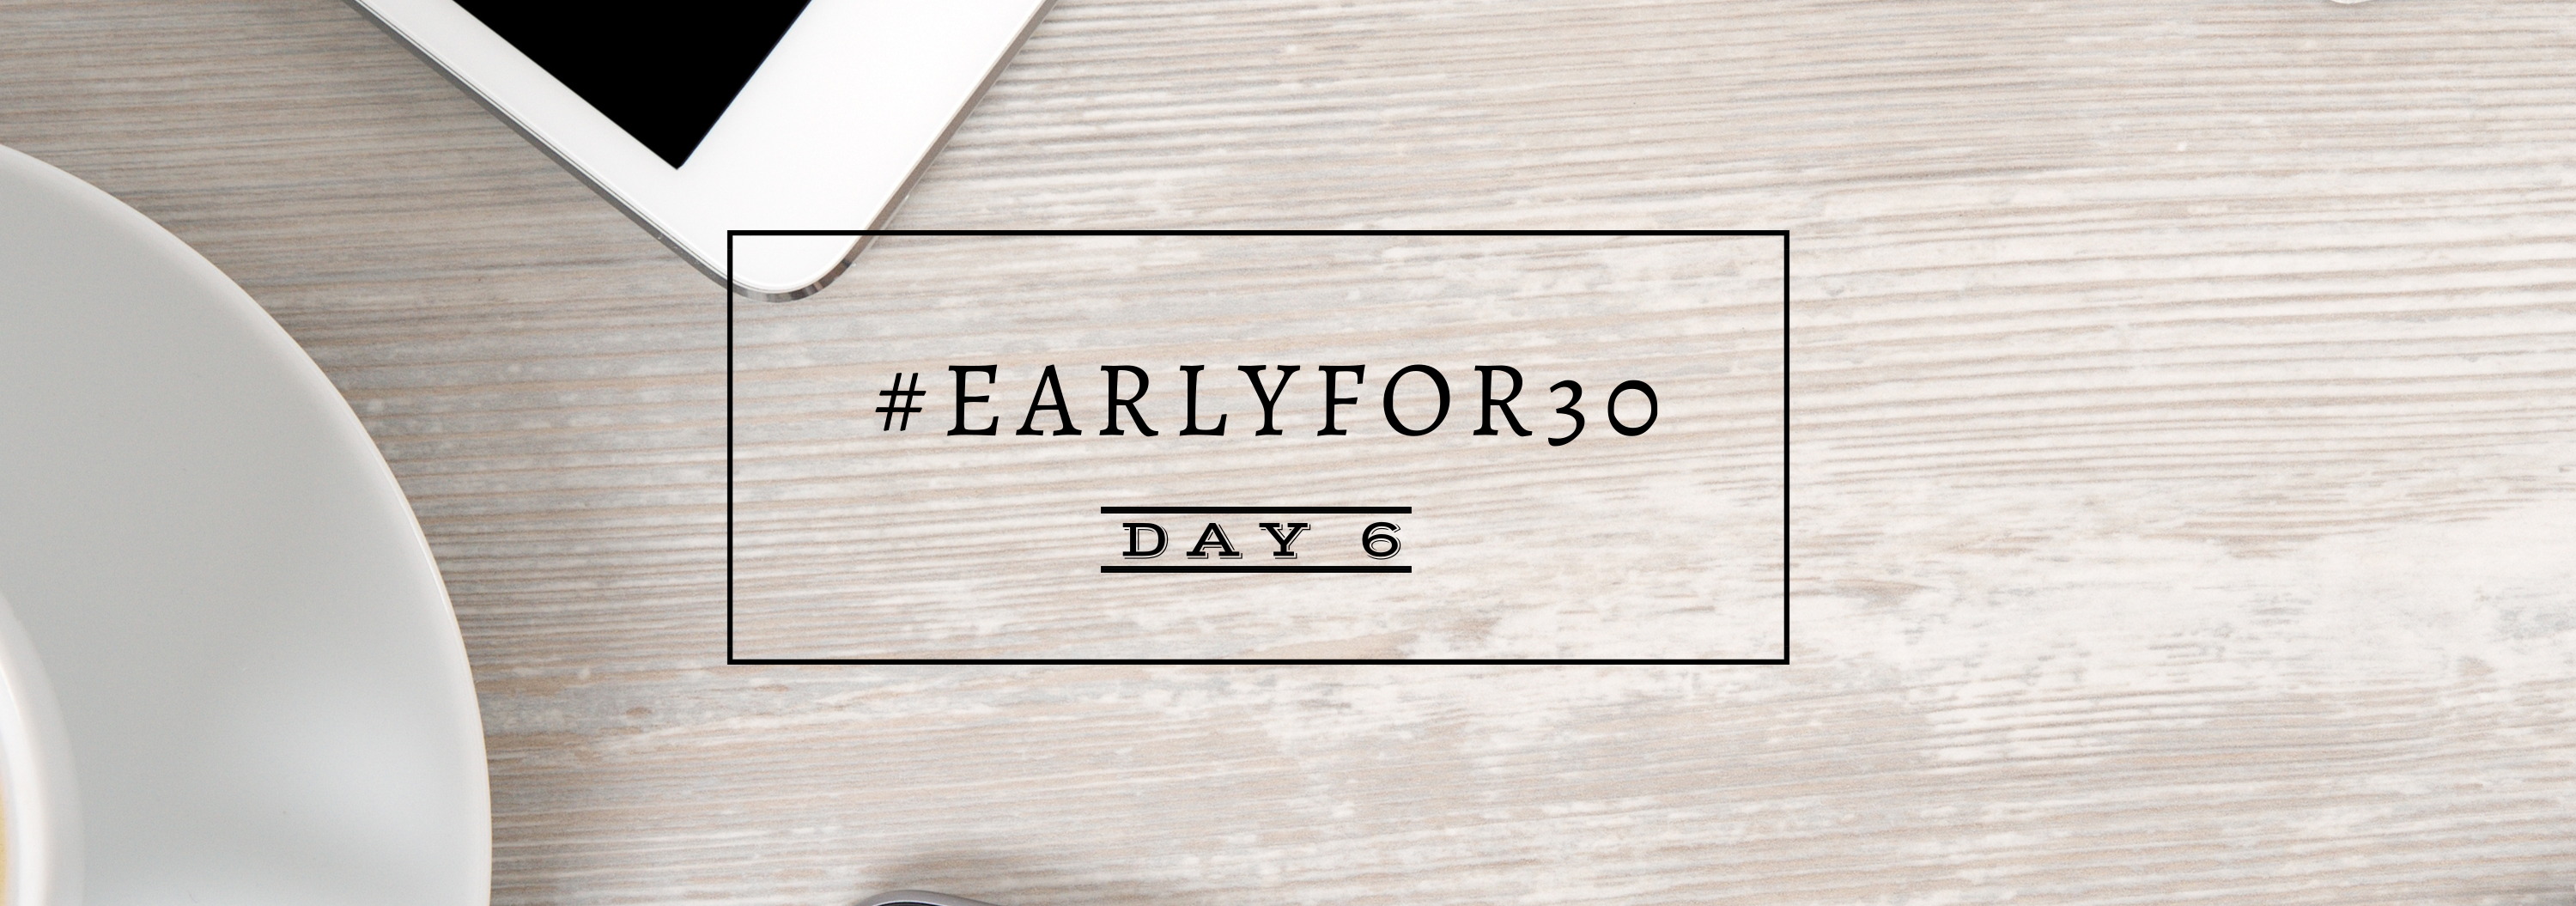 #Earlyfor30 – Day 6